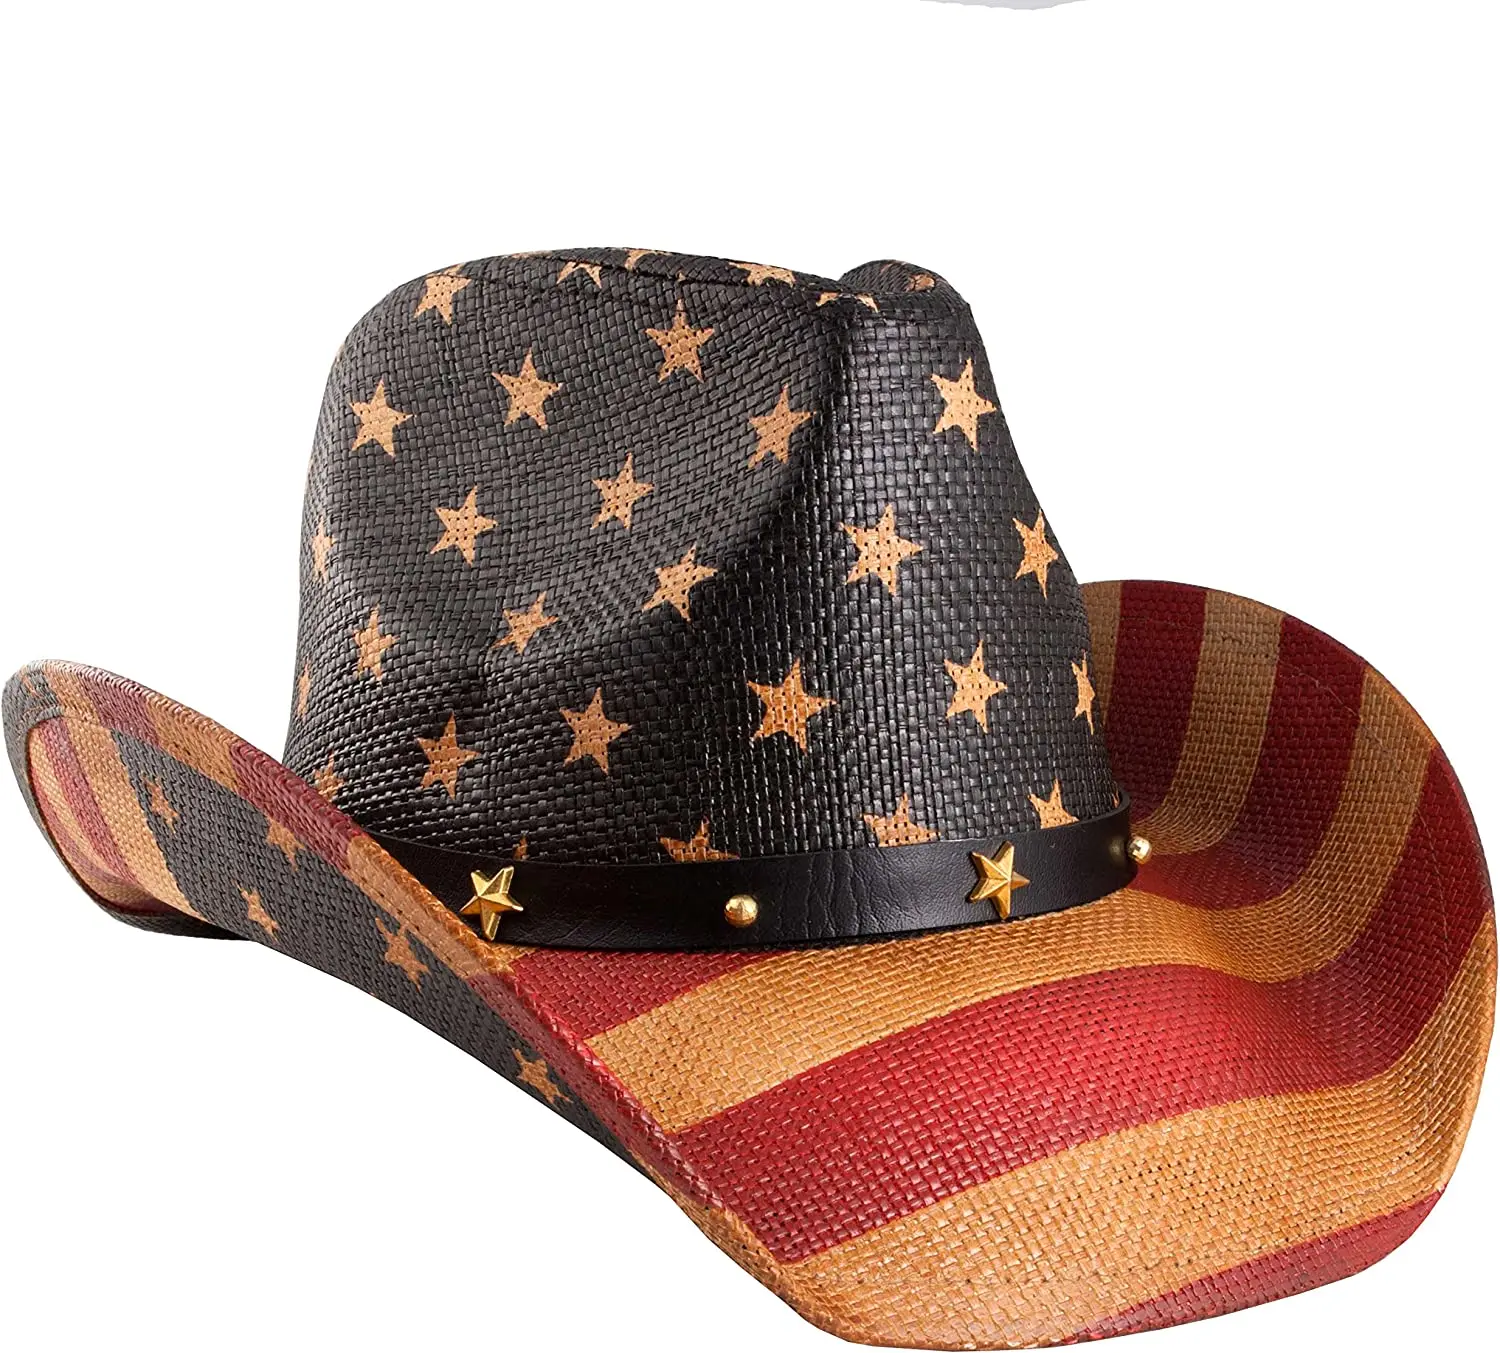 American Patriot Flag 4th Of July United States Cowboy Hat, 45% OFF